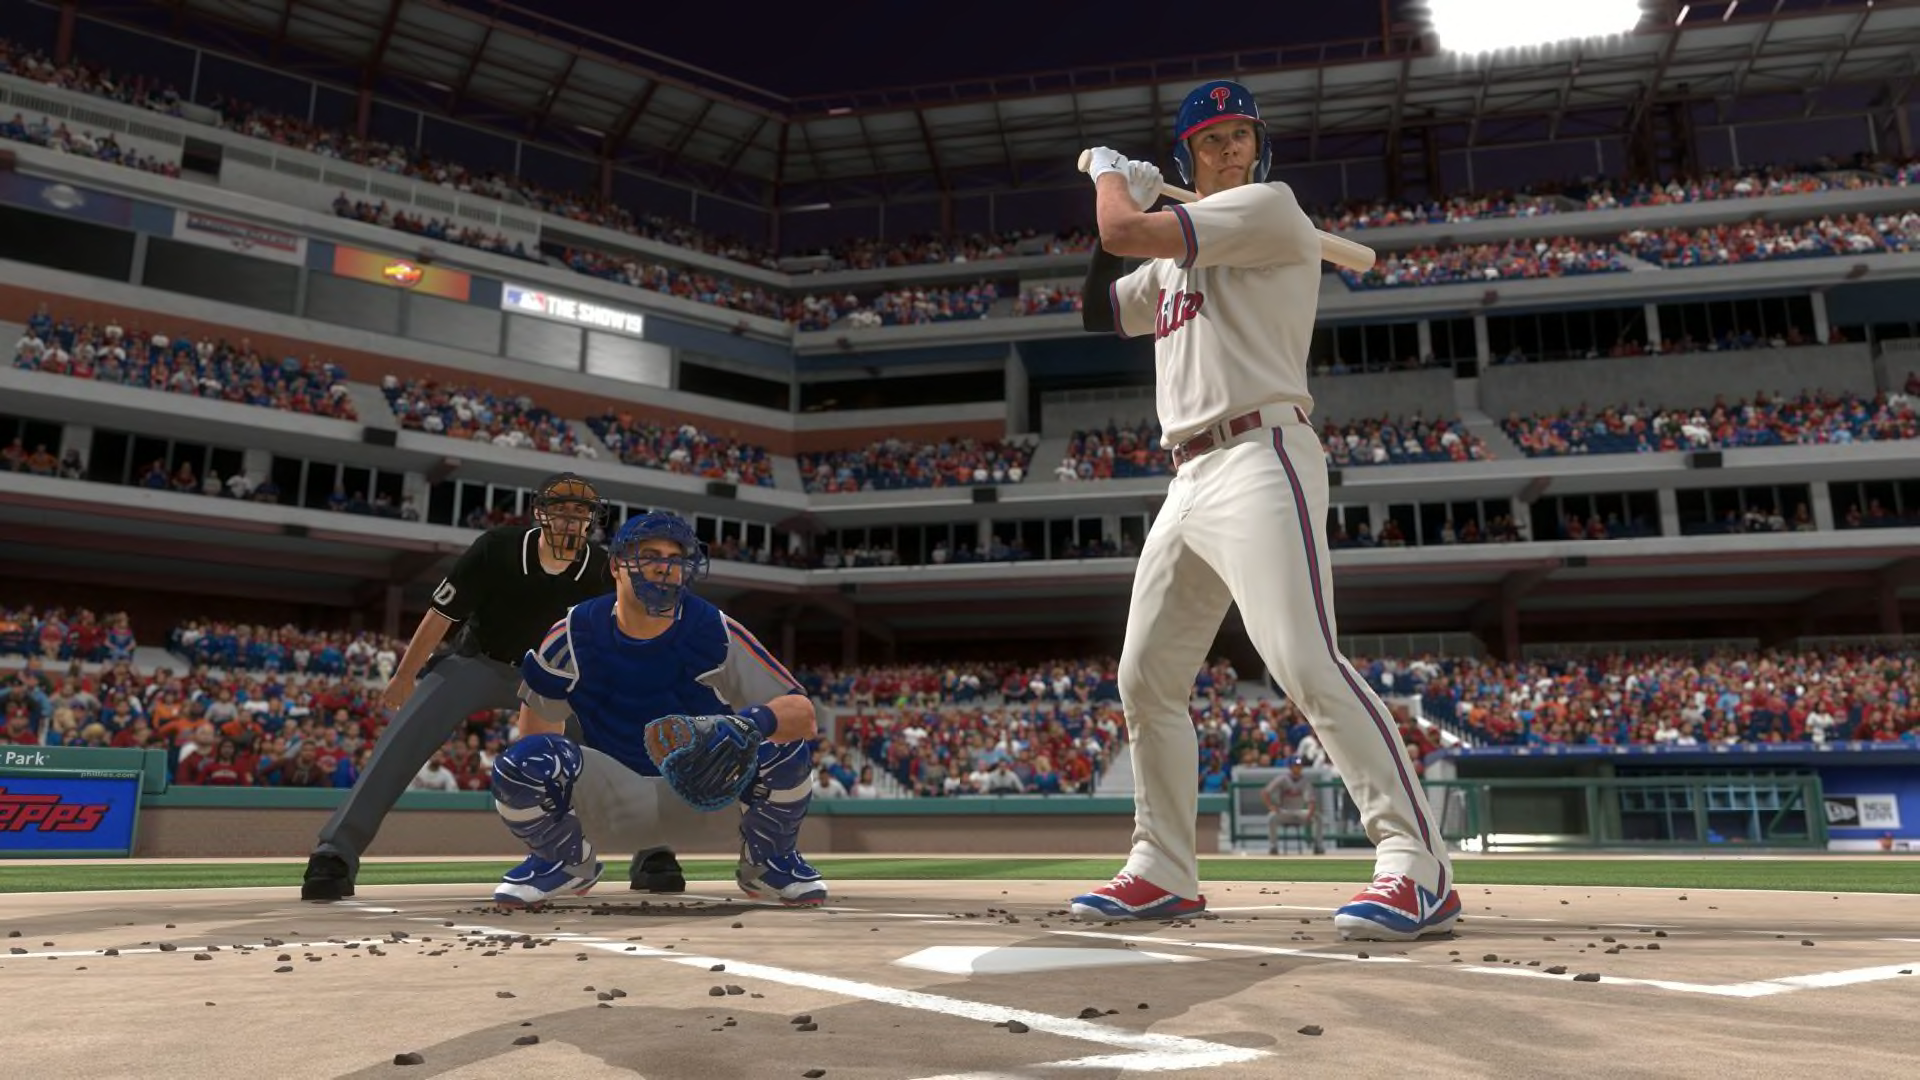 MLB The Show 19 review Nailed down to a science